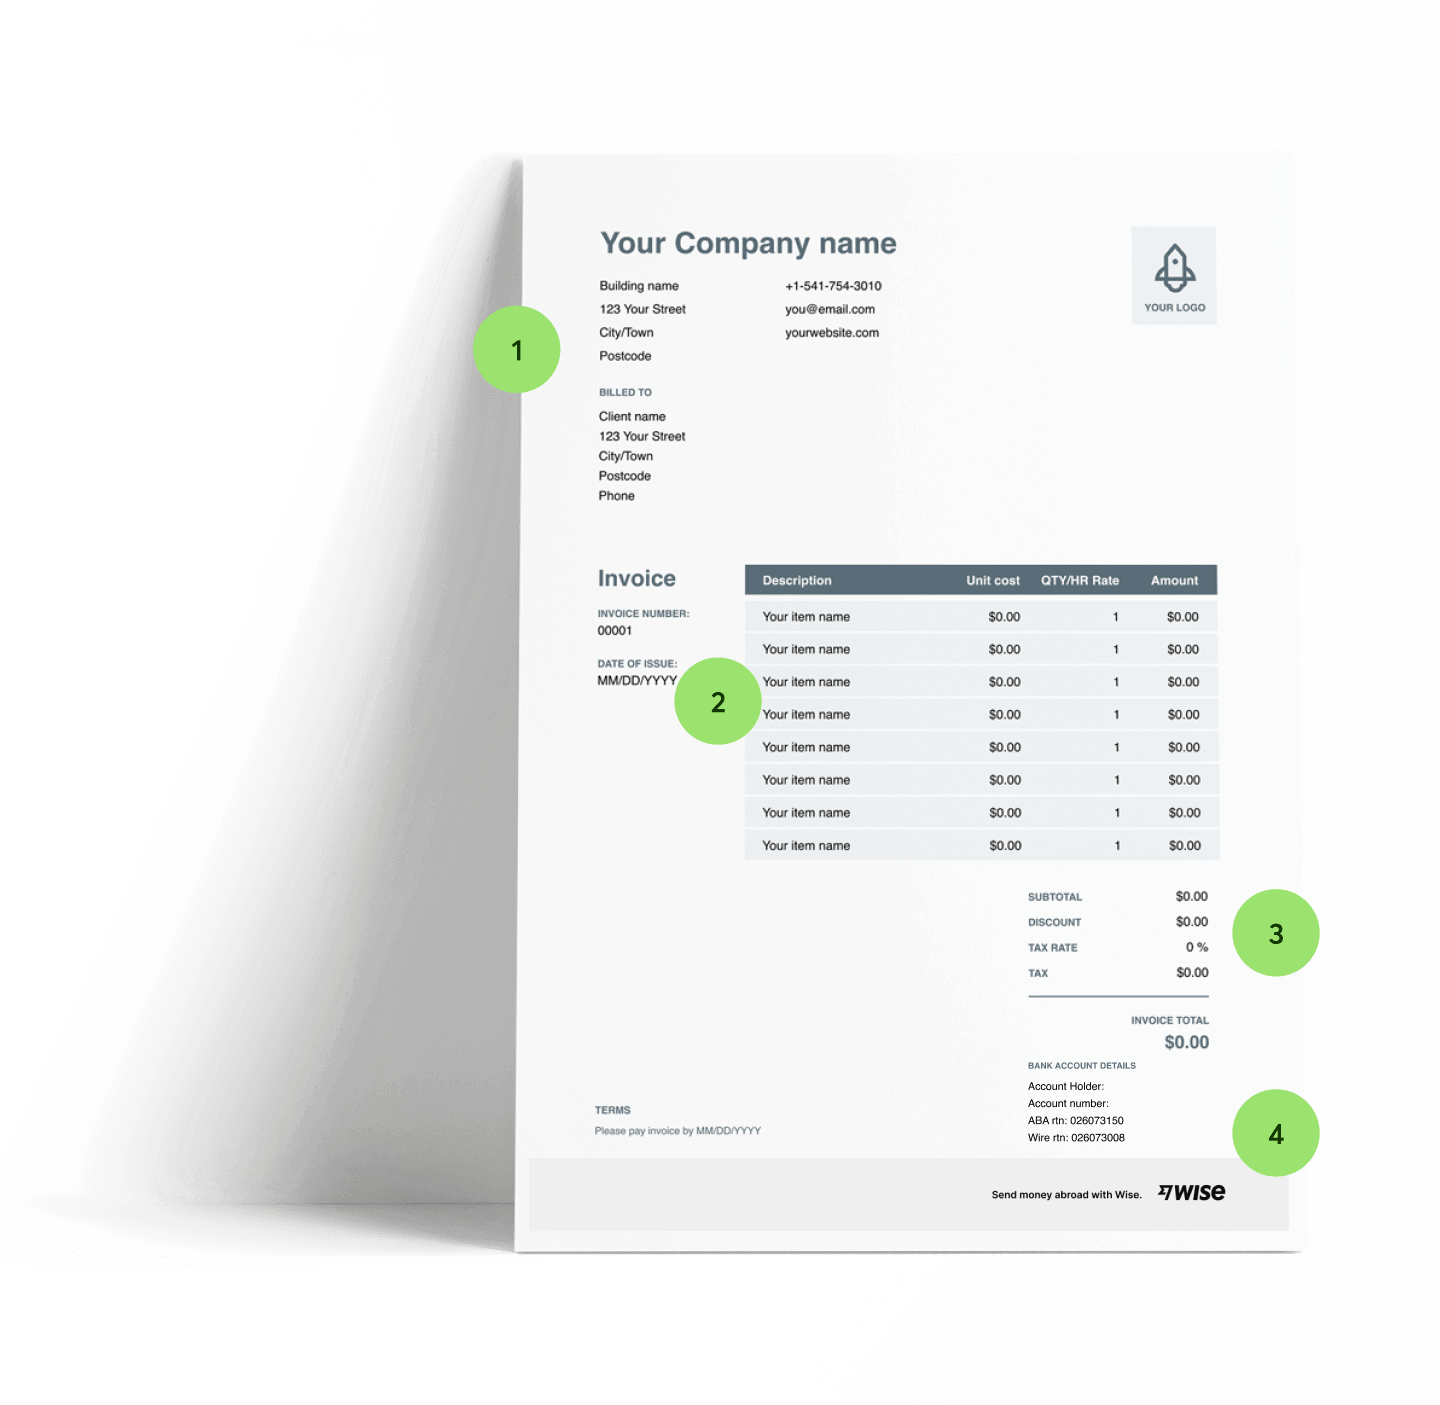 Receipt Template in PDF - Free Download - Wise